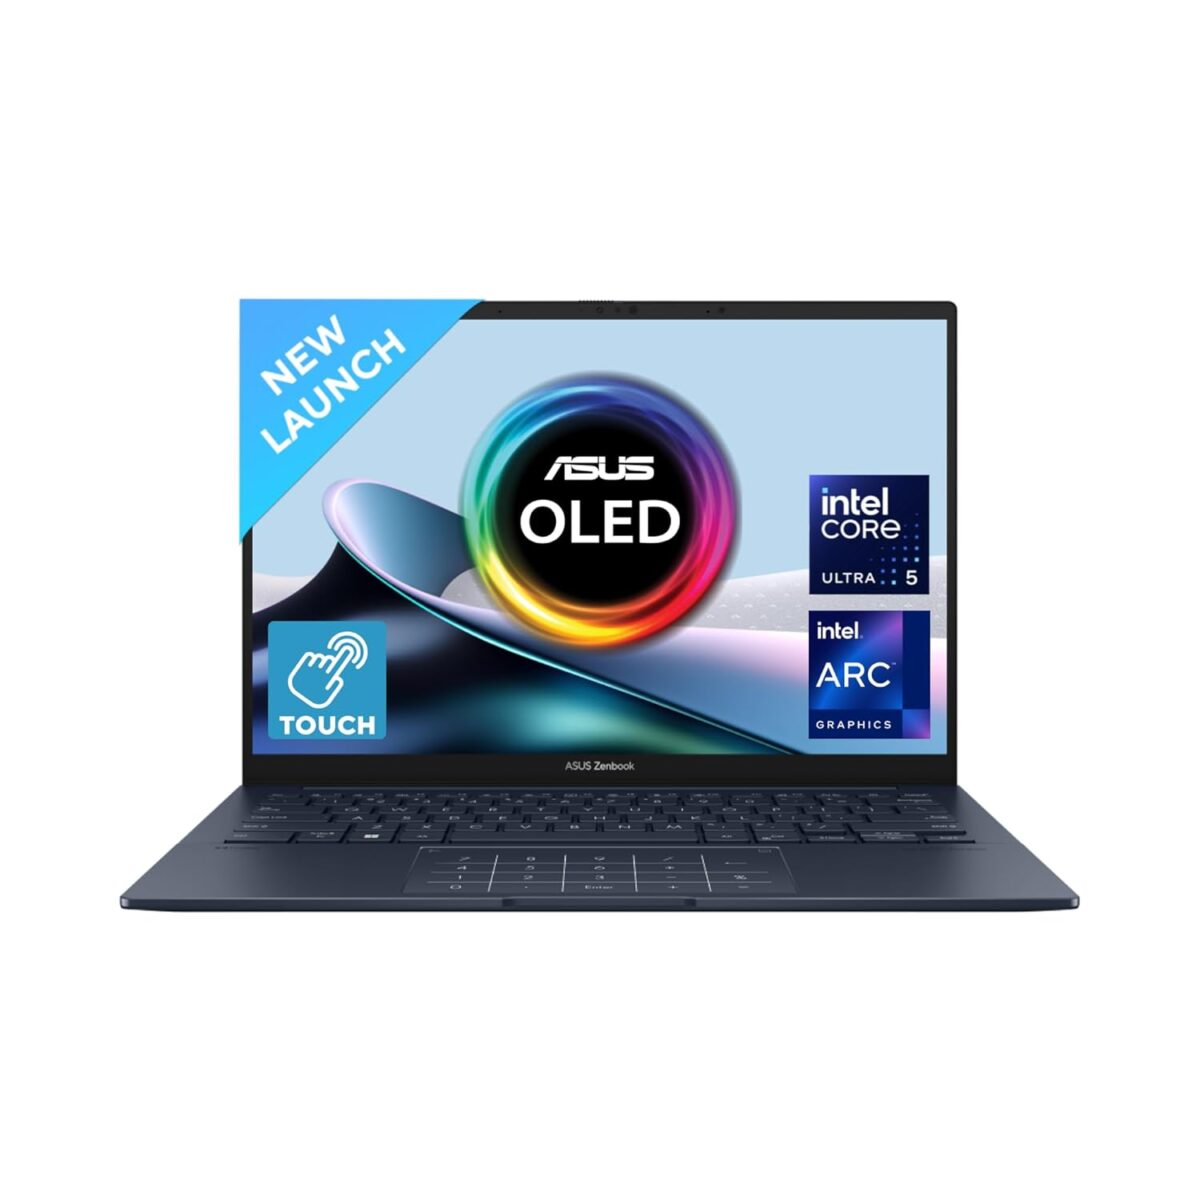 ASUS Zenbook 14 OLED UX3405MA-PZ552WS 3K 120Hz laptop Launched in India [ Core Ultra 5 125H / 16GB ram / 1TB SSD ]